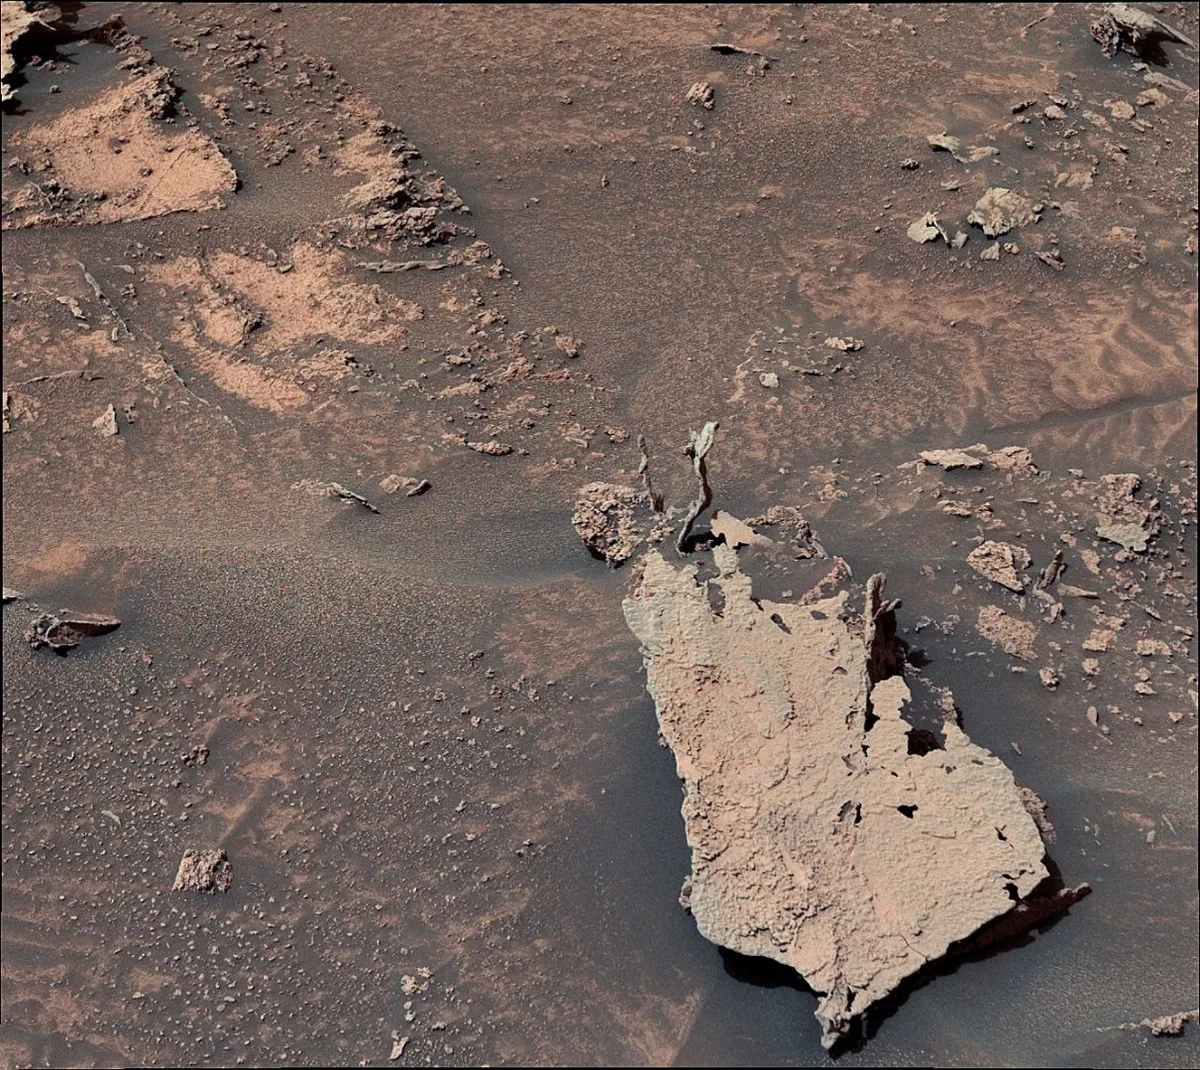  Rust-coloured rocks on Mars as seen by Curiosity Rover, 15 May 2022. Credit: NASA/JPL-Caltech/MSSS